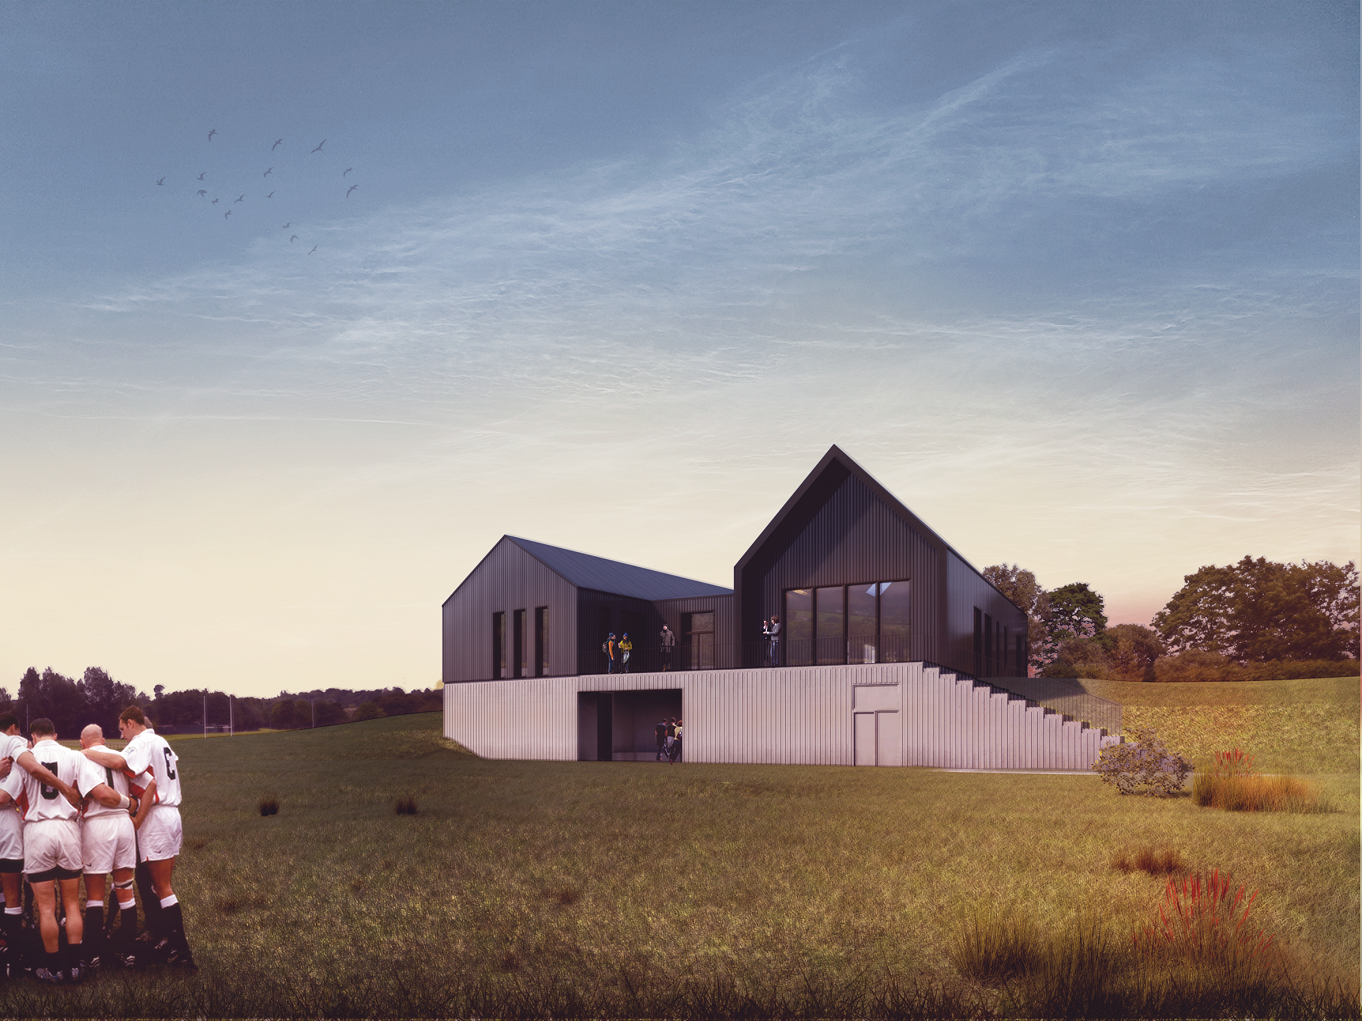 Collective Architecture gains planning approval for Glengarnock facility